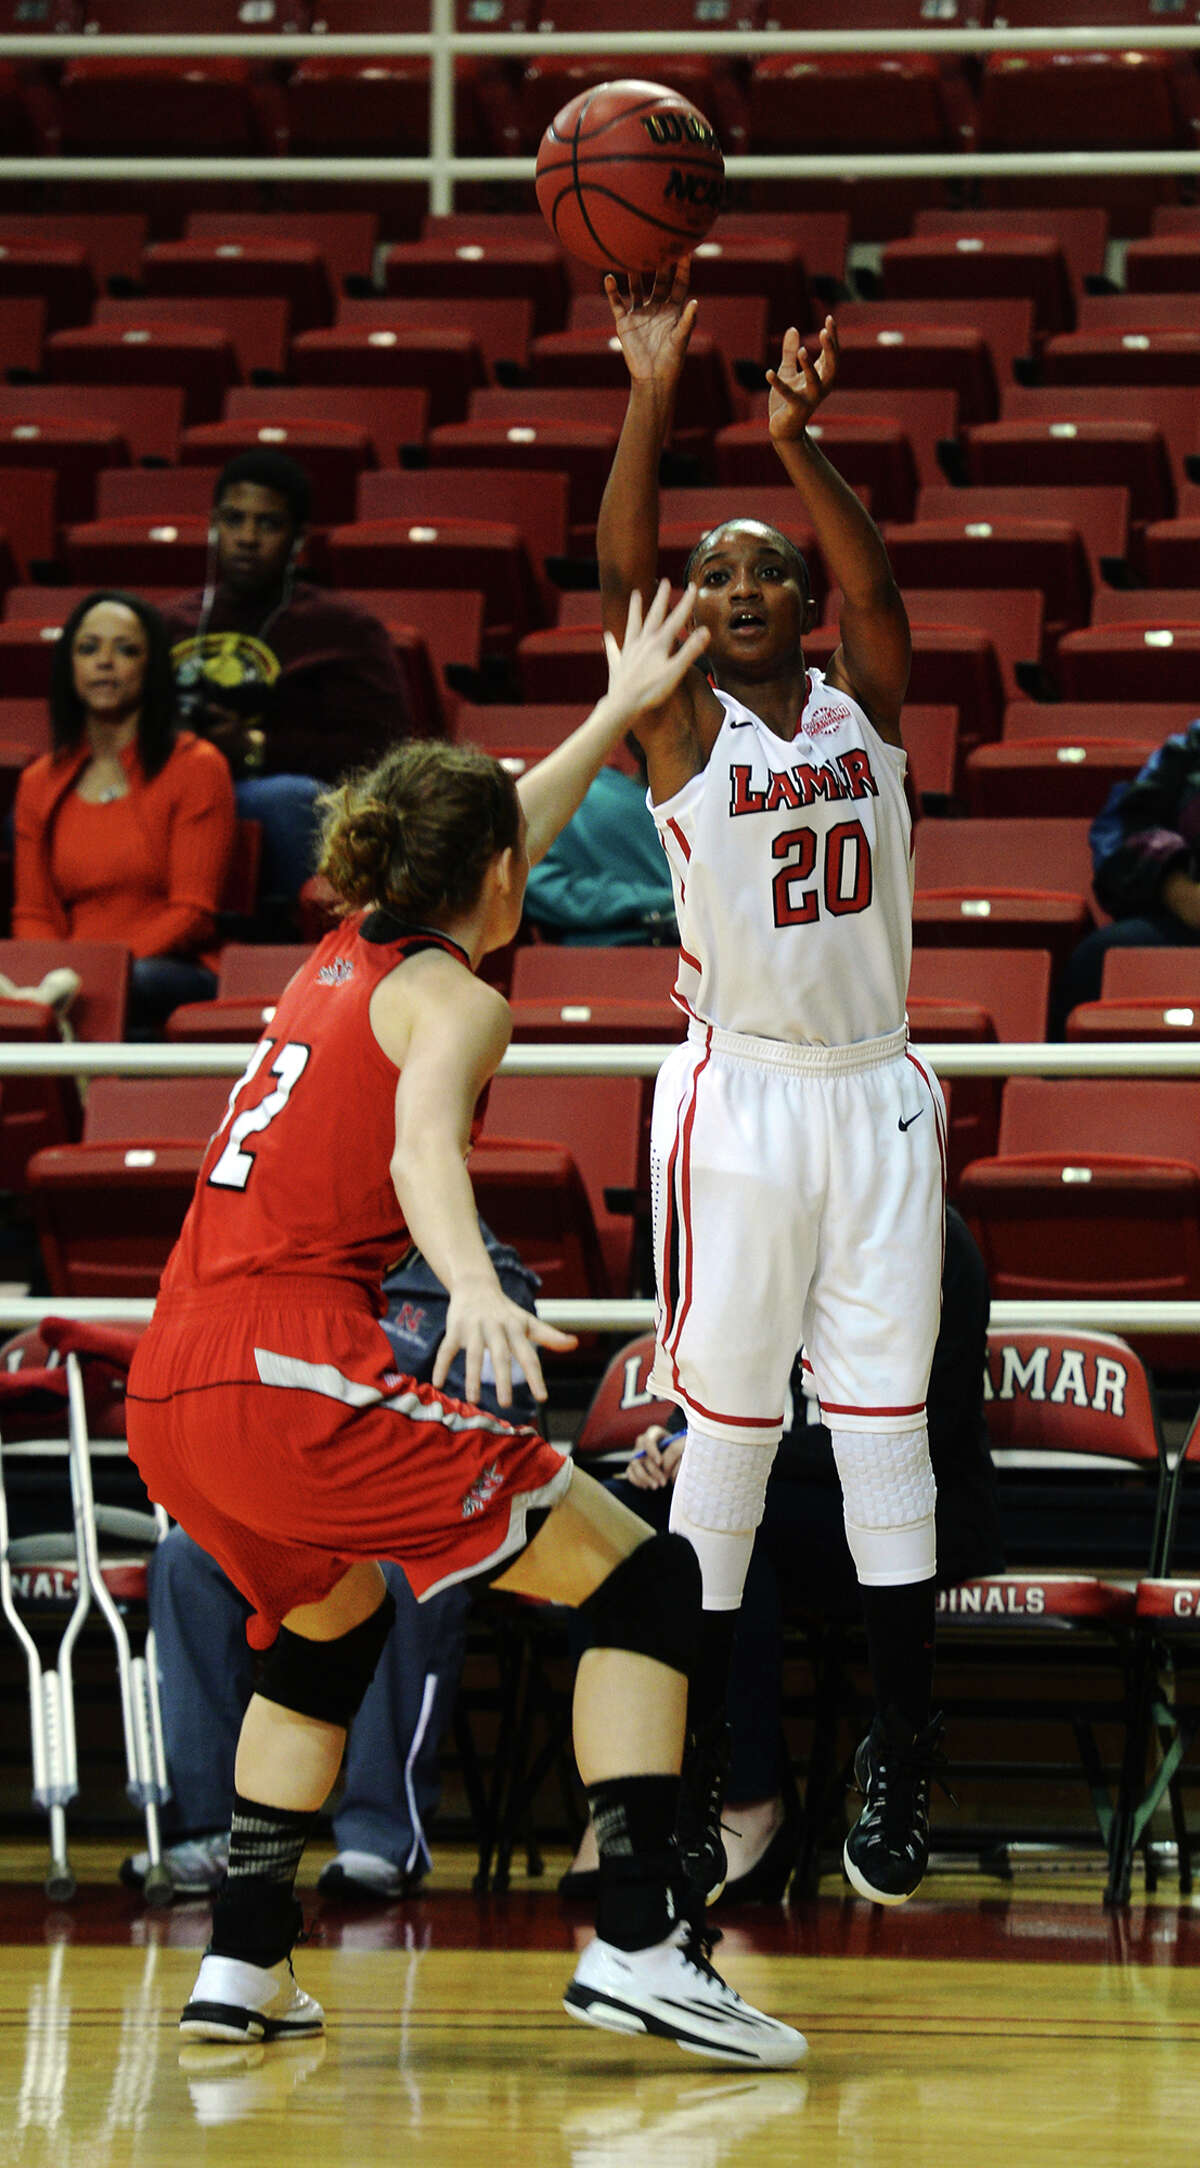 Lamar's JaMeisha Edwards, No. 20, shoots over the head of Nicholls' Jenny Nash, No. 12, during Saturday's game. The Lamar Lady Cardinals hosted the Nicholls Colonels at the Montagne Center on Saturday. Photo taken Saturday 1/3/15 Jake Daniels/The Enterprise